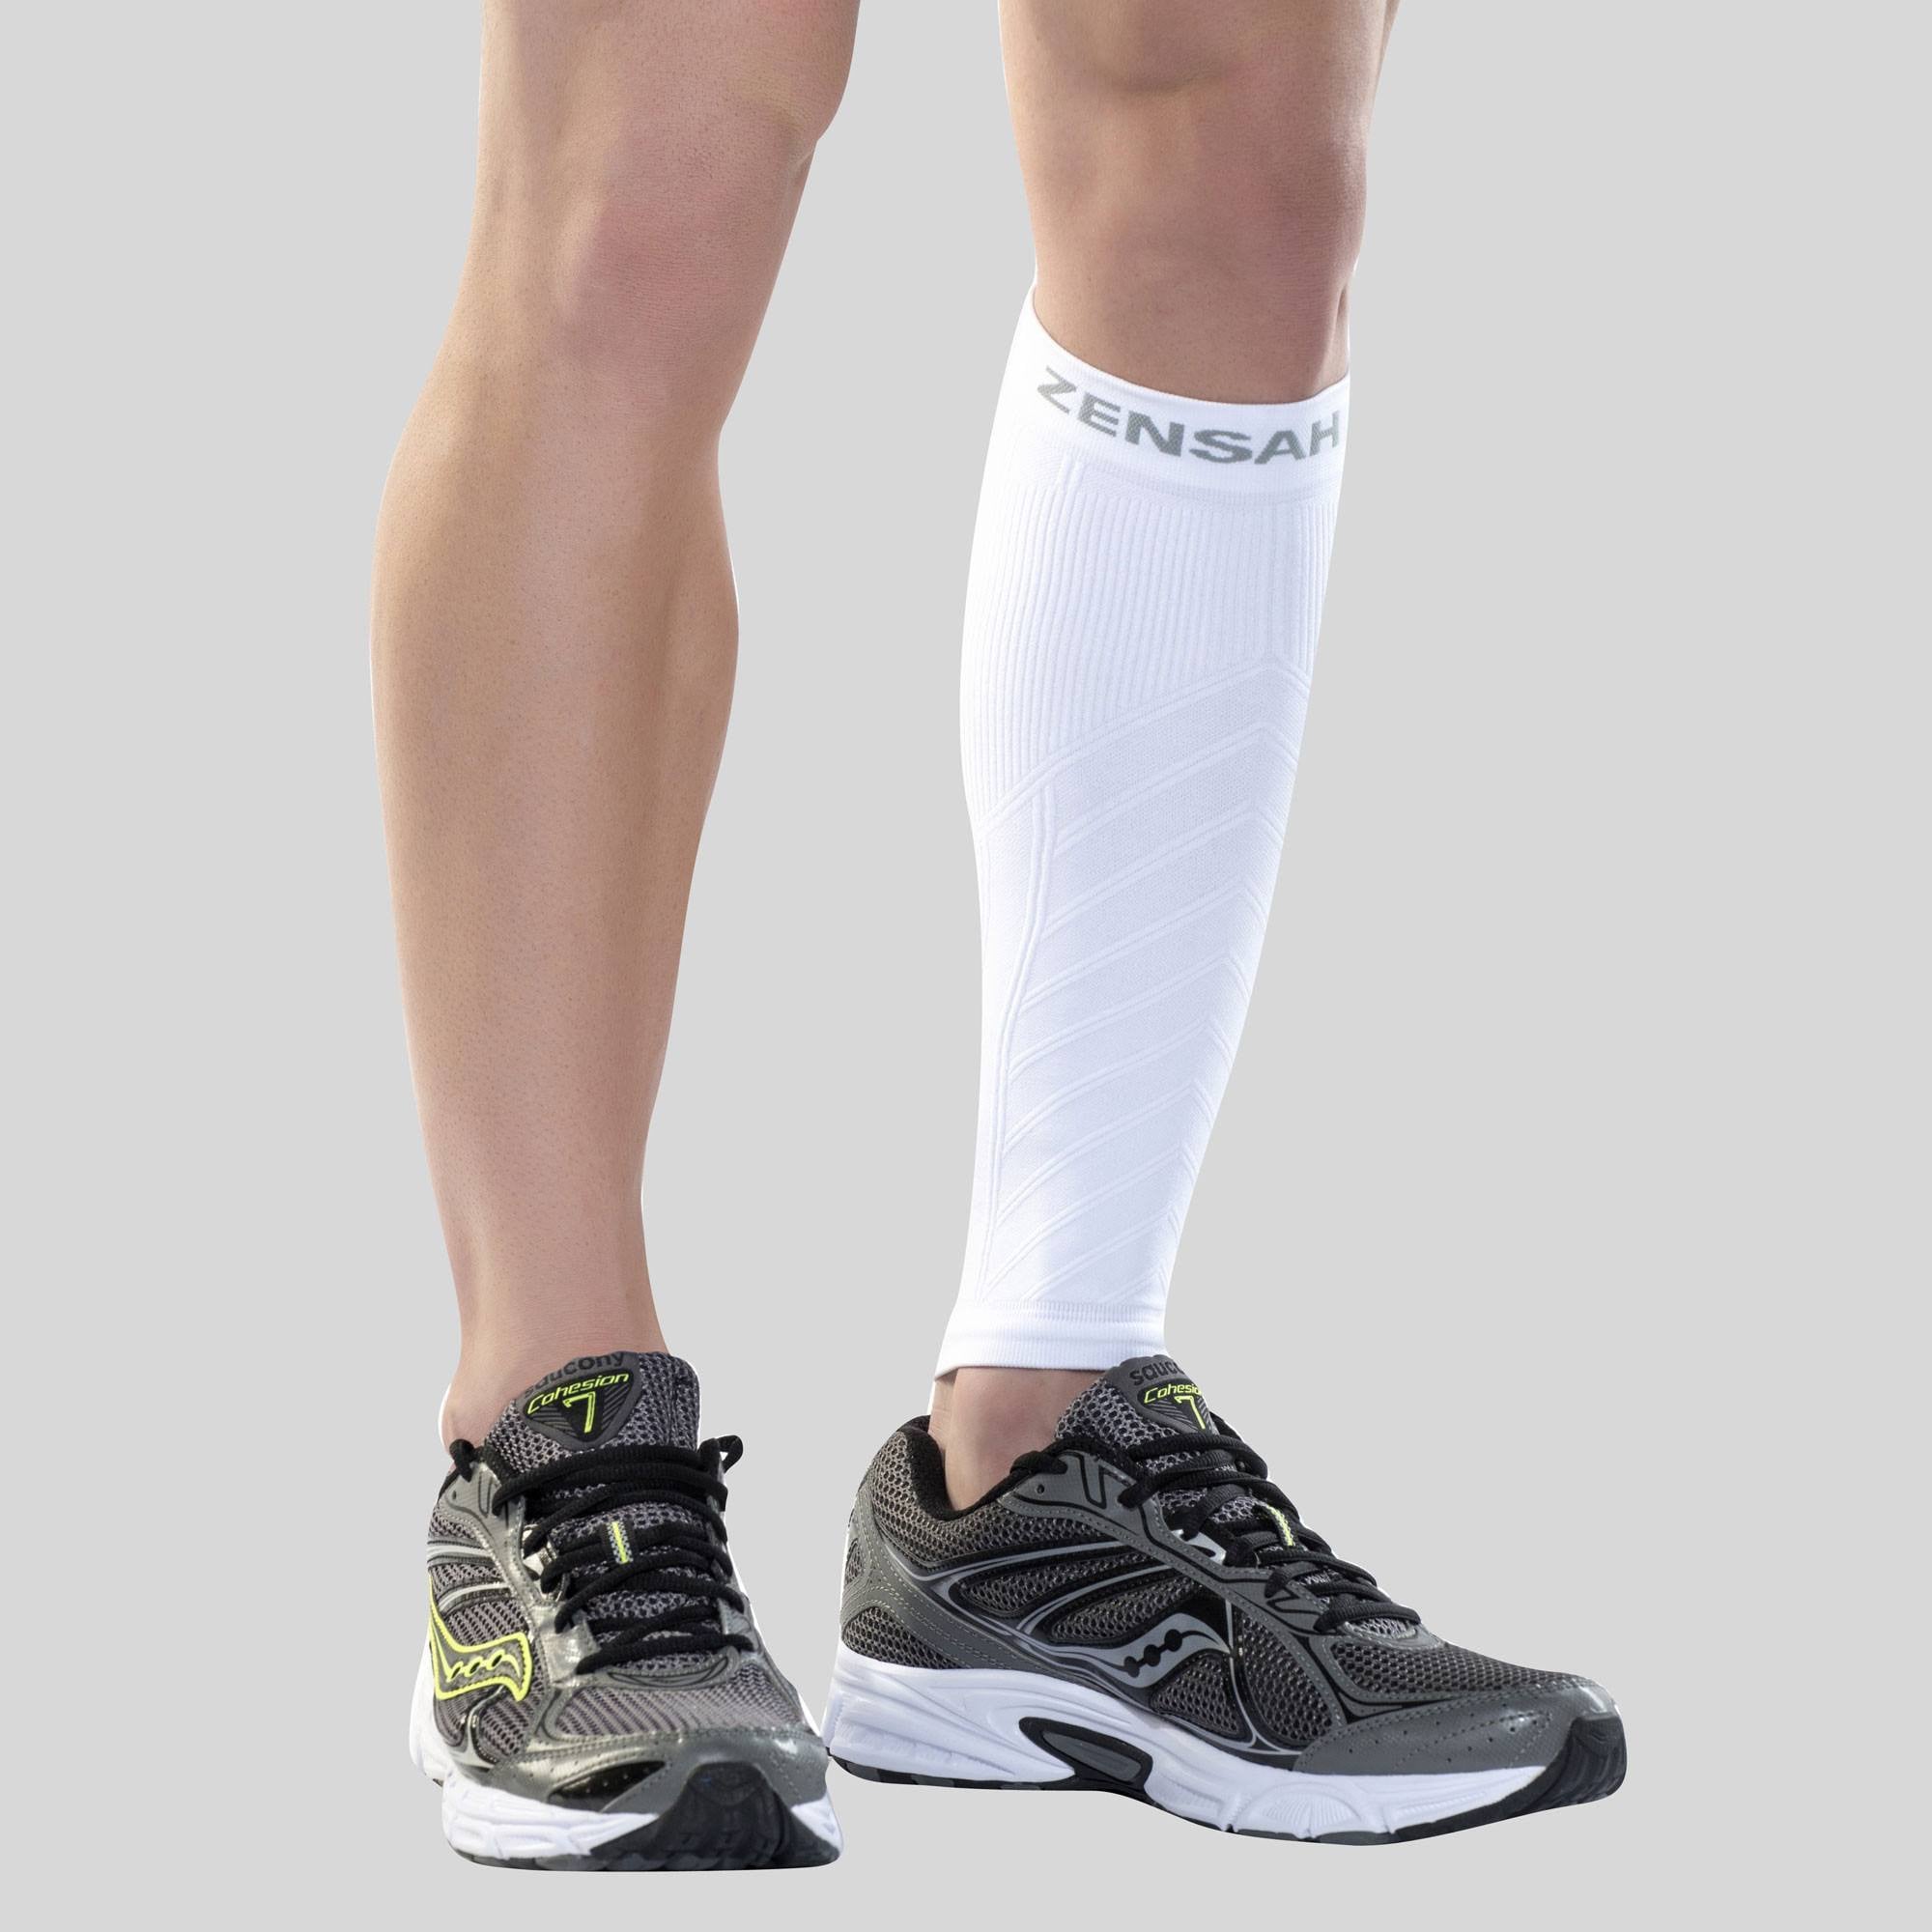 Calf Compression Sleeves for Running | Pain Relief from Shin Splints,  Neuropathy & Varicose Veins | Footless